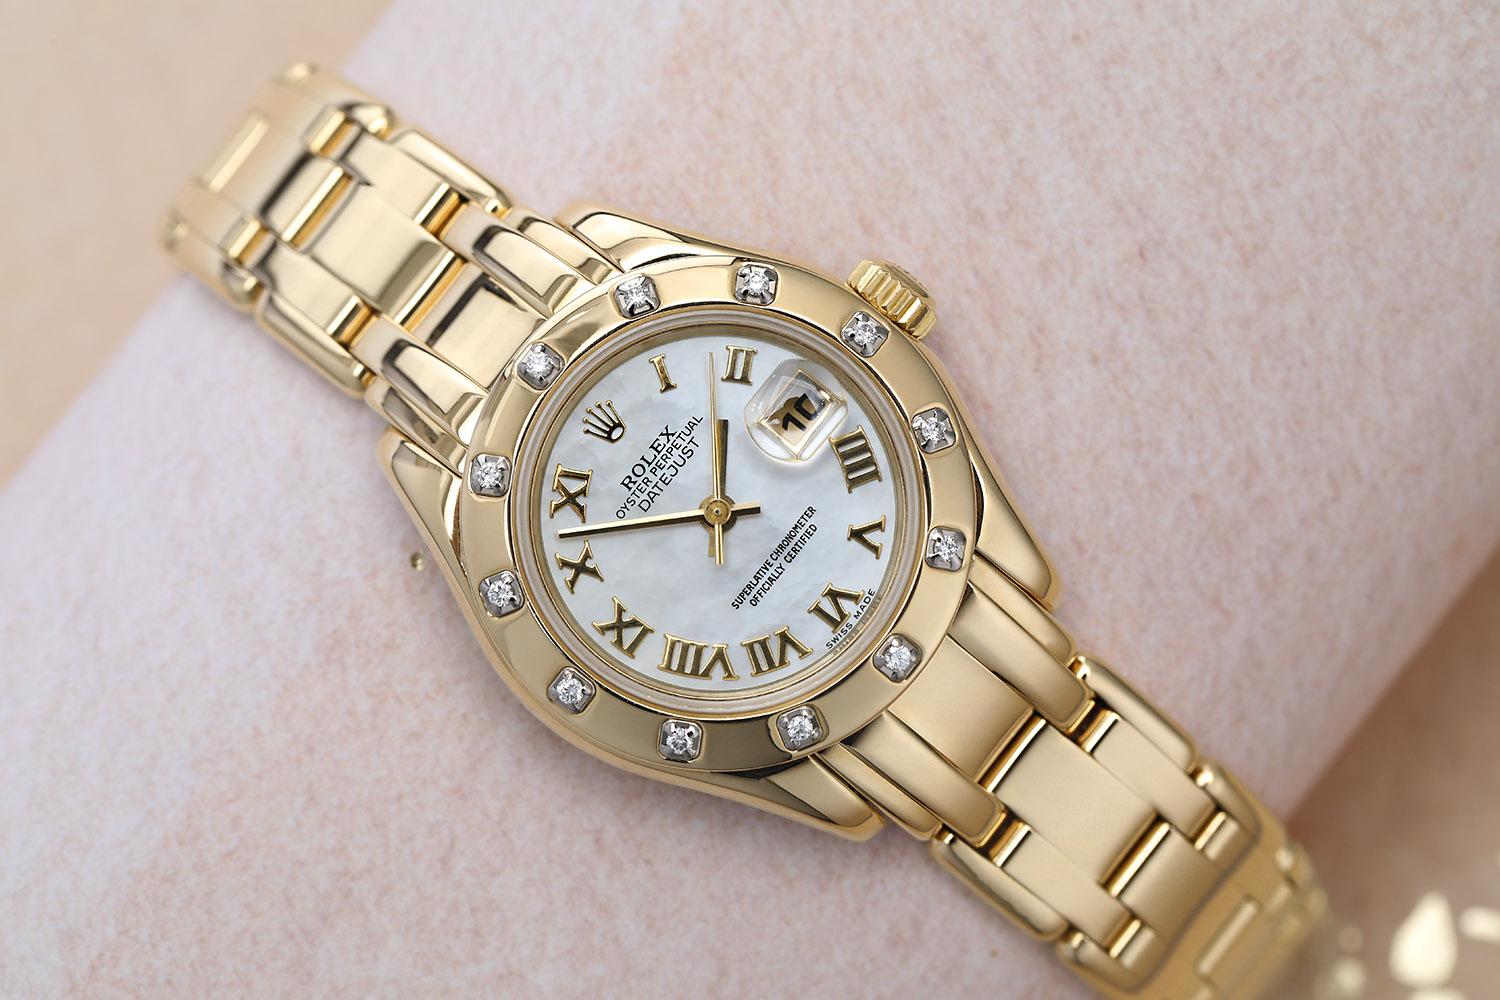 COMES WITH A ROLEX BOX, APPRAISAL CERTIFICATE VALIDATING AUTHENTICITY AND IN-HOUSE 1 YEAR MECHANICAL WARRANTY.
Yellow gold case with a yellow gold Rolex pearl master bracelet. Fixed yellow gold bezel set with diamonds. White mother of pearl dial